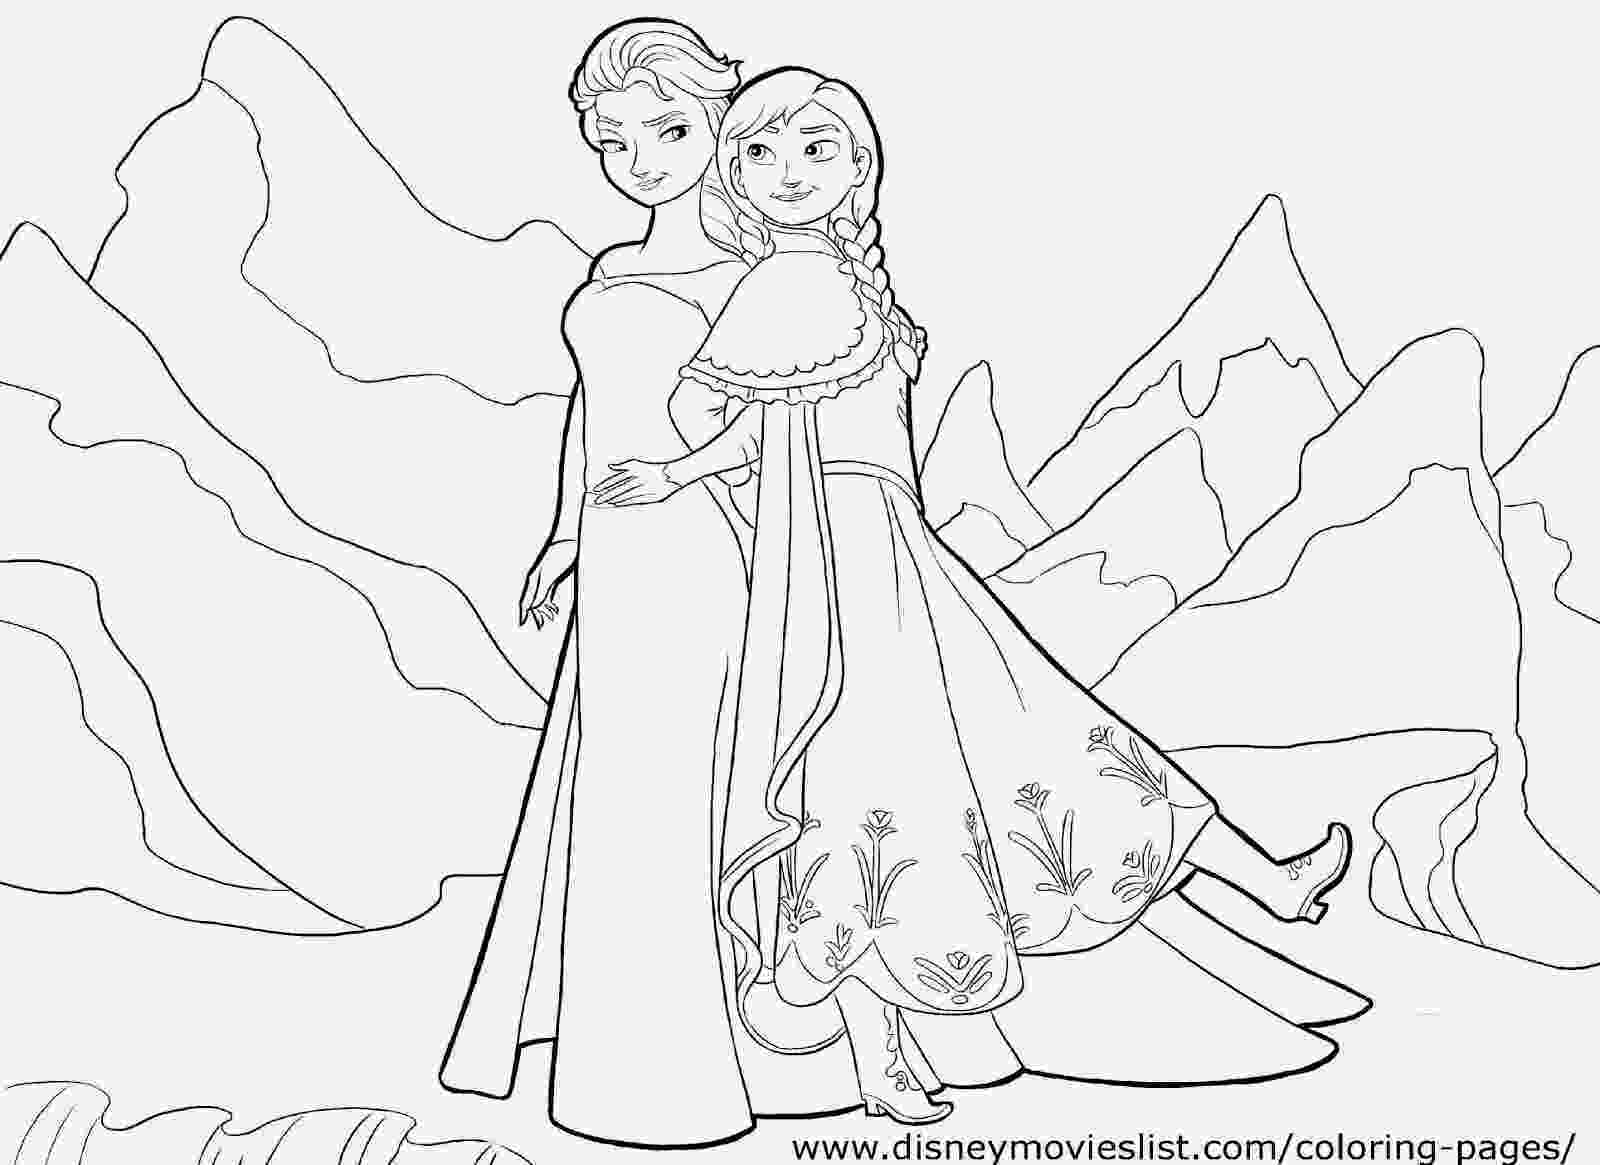 anna and elsa coloring pages december 2014 free coloring sheet anna pages coloring and elsa 